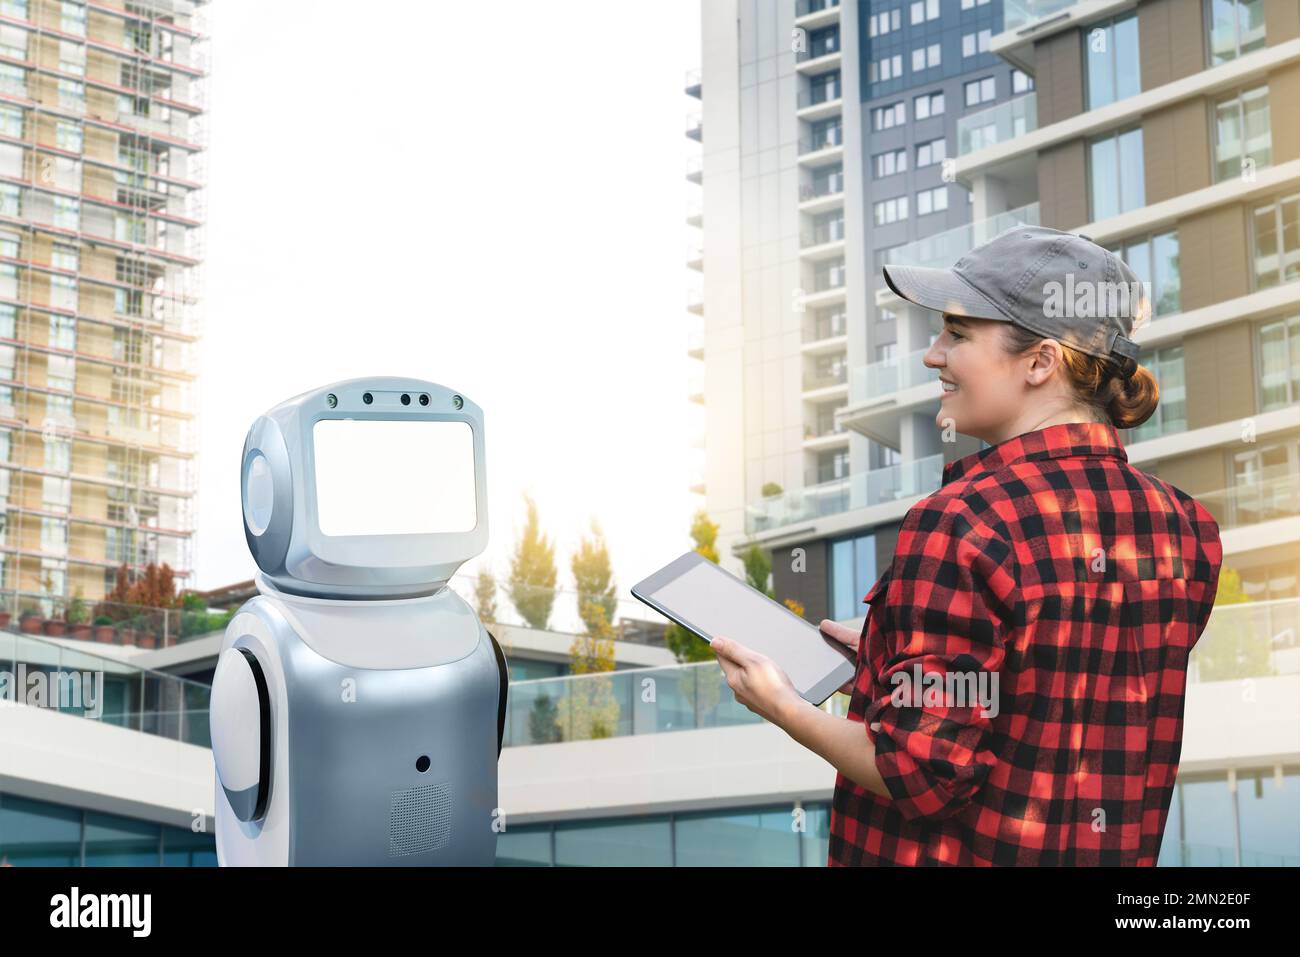 Robot assistant with woman worker in front of building. Concept, idea Stock Photo